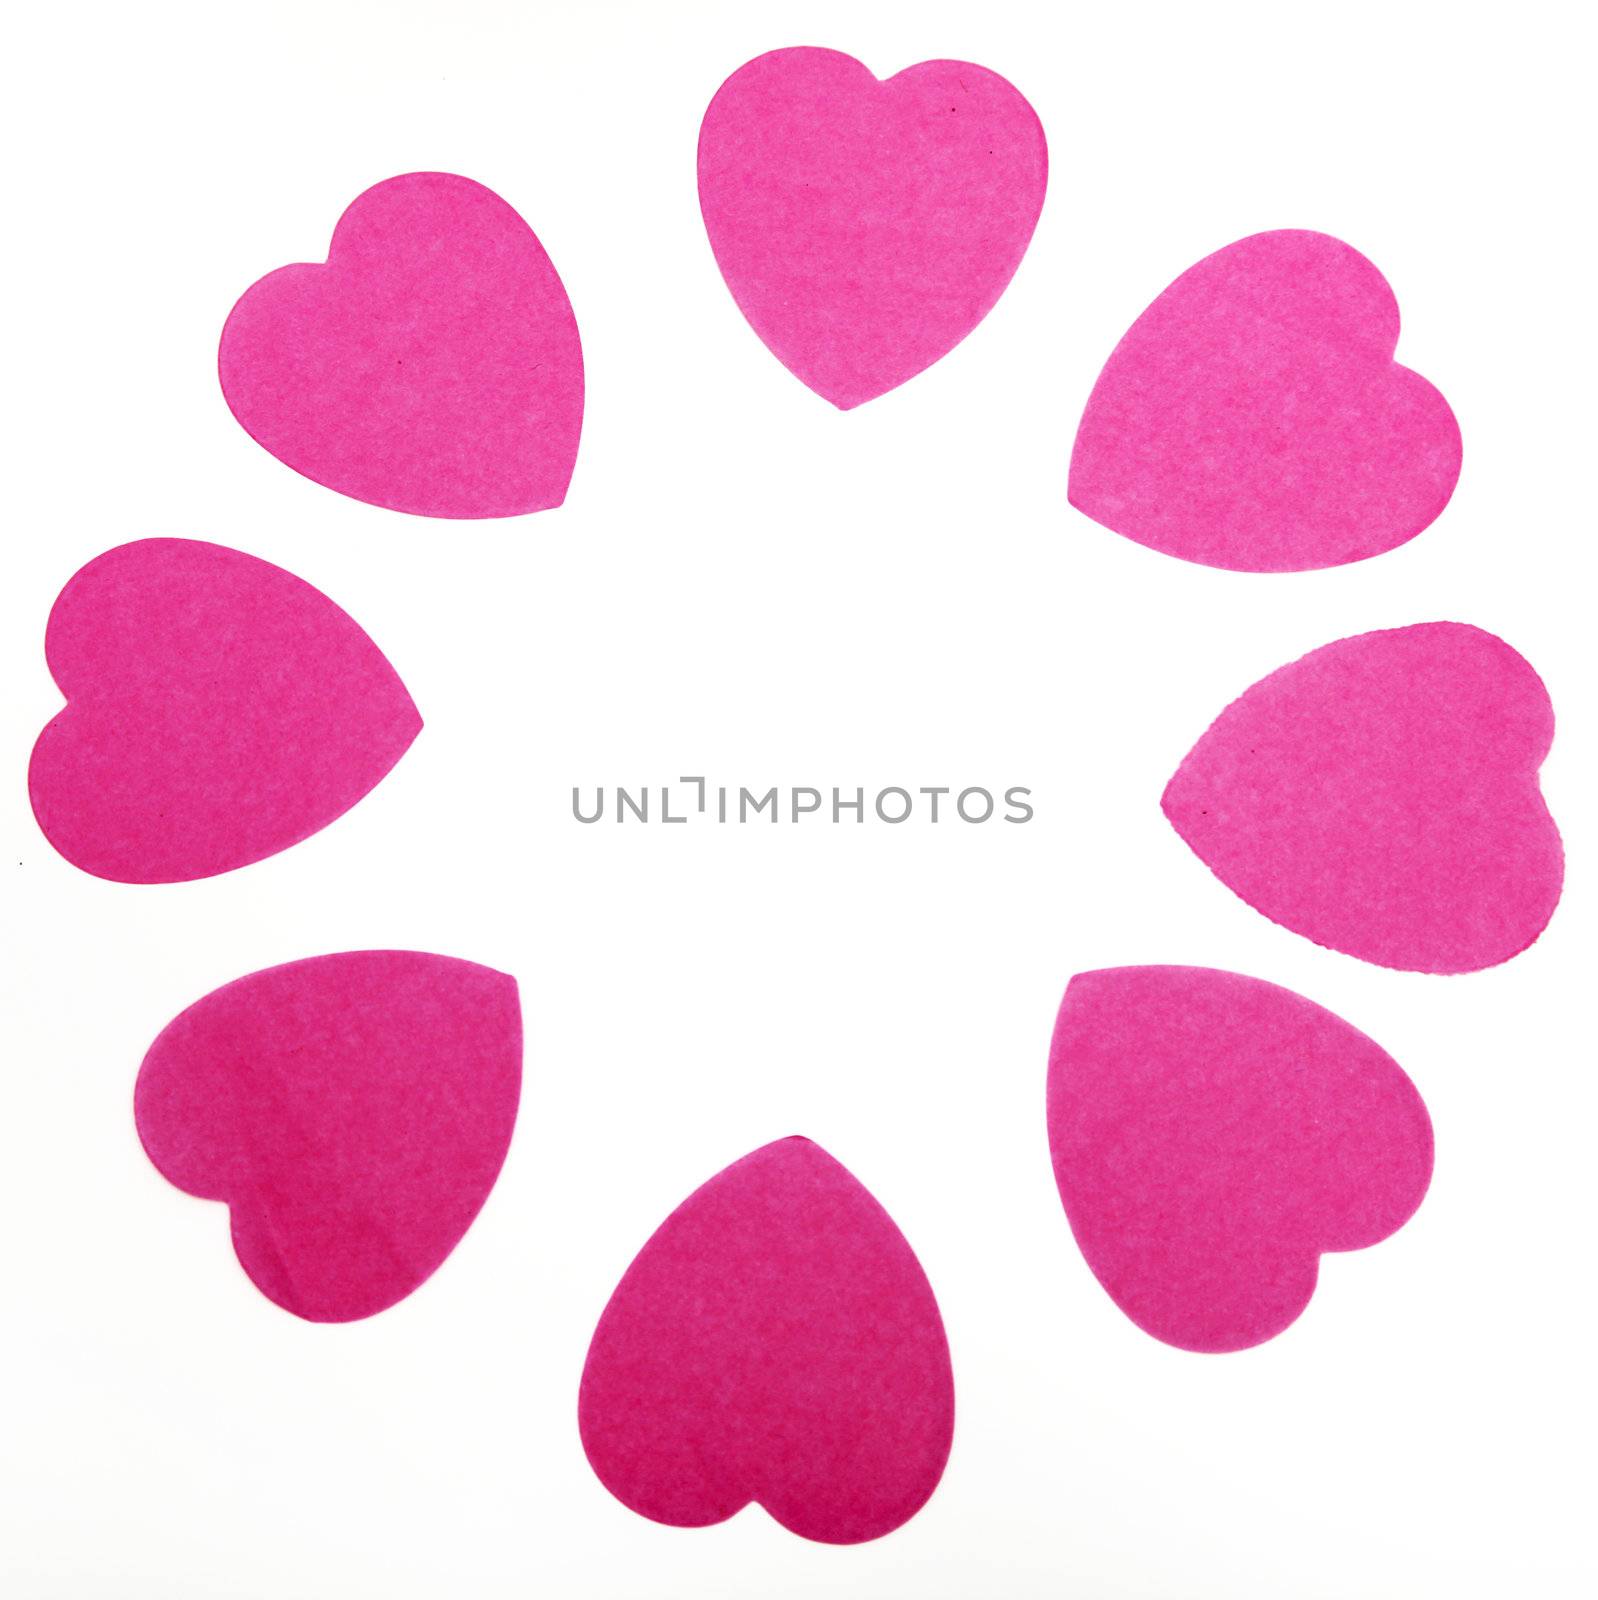 Circle of pink hearts on white background